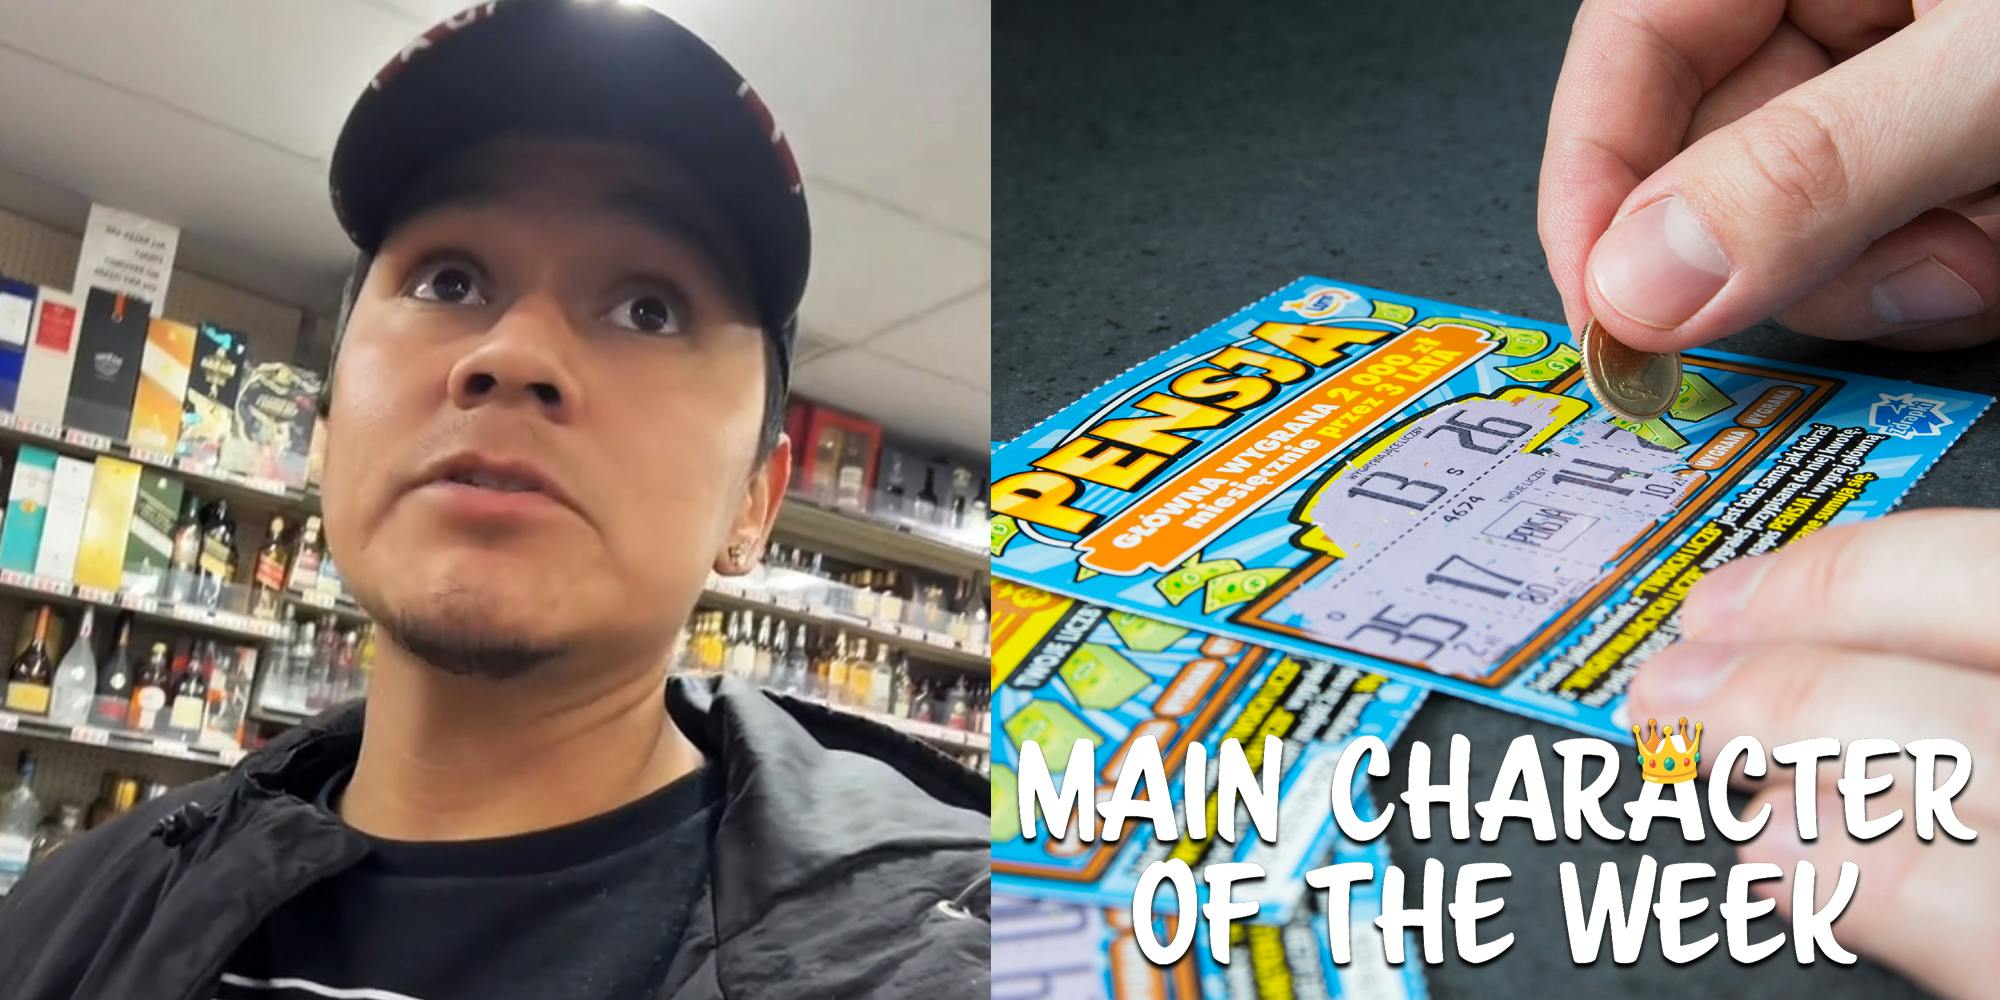 A person speaking to the camera next to a person doing a scratch off card. There is text that says 'Main Character of the Week'